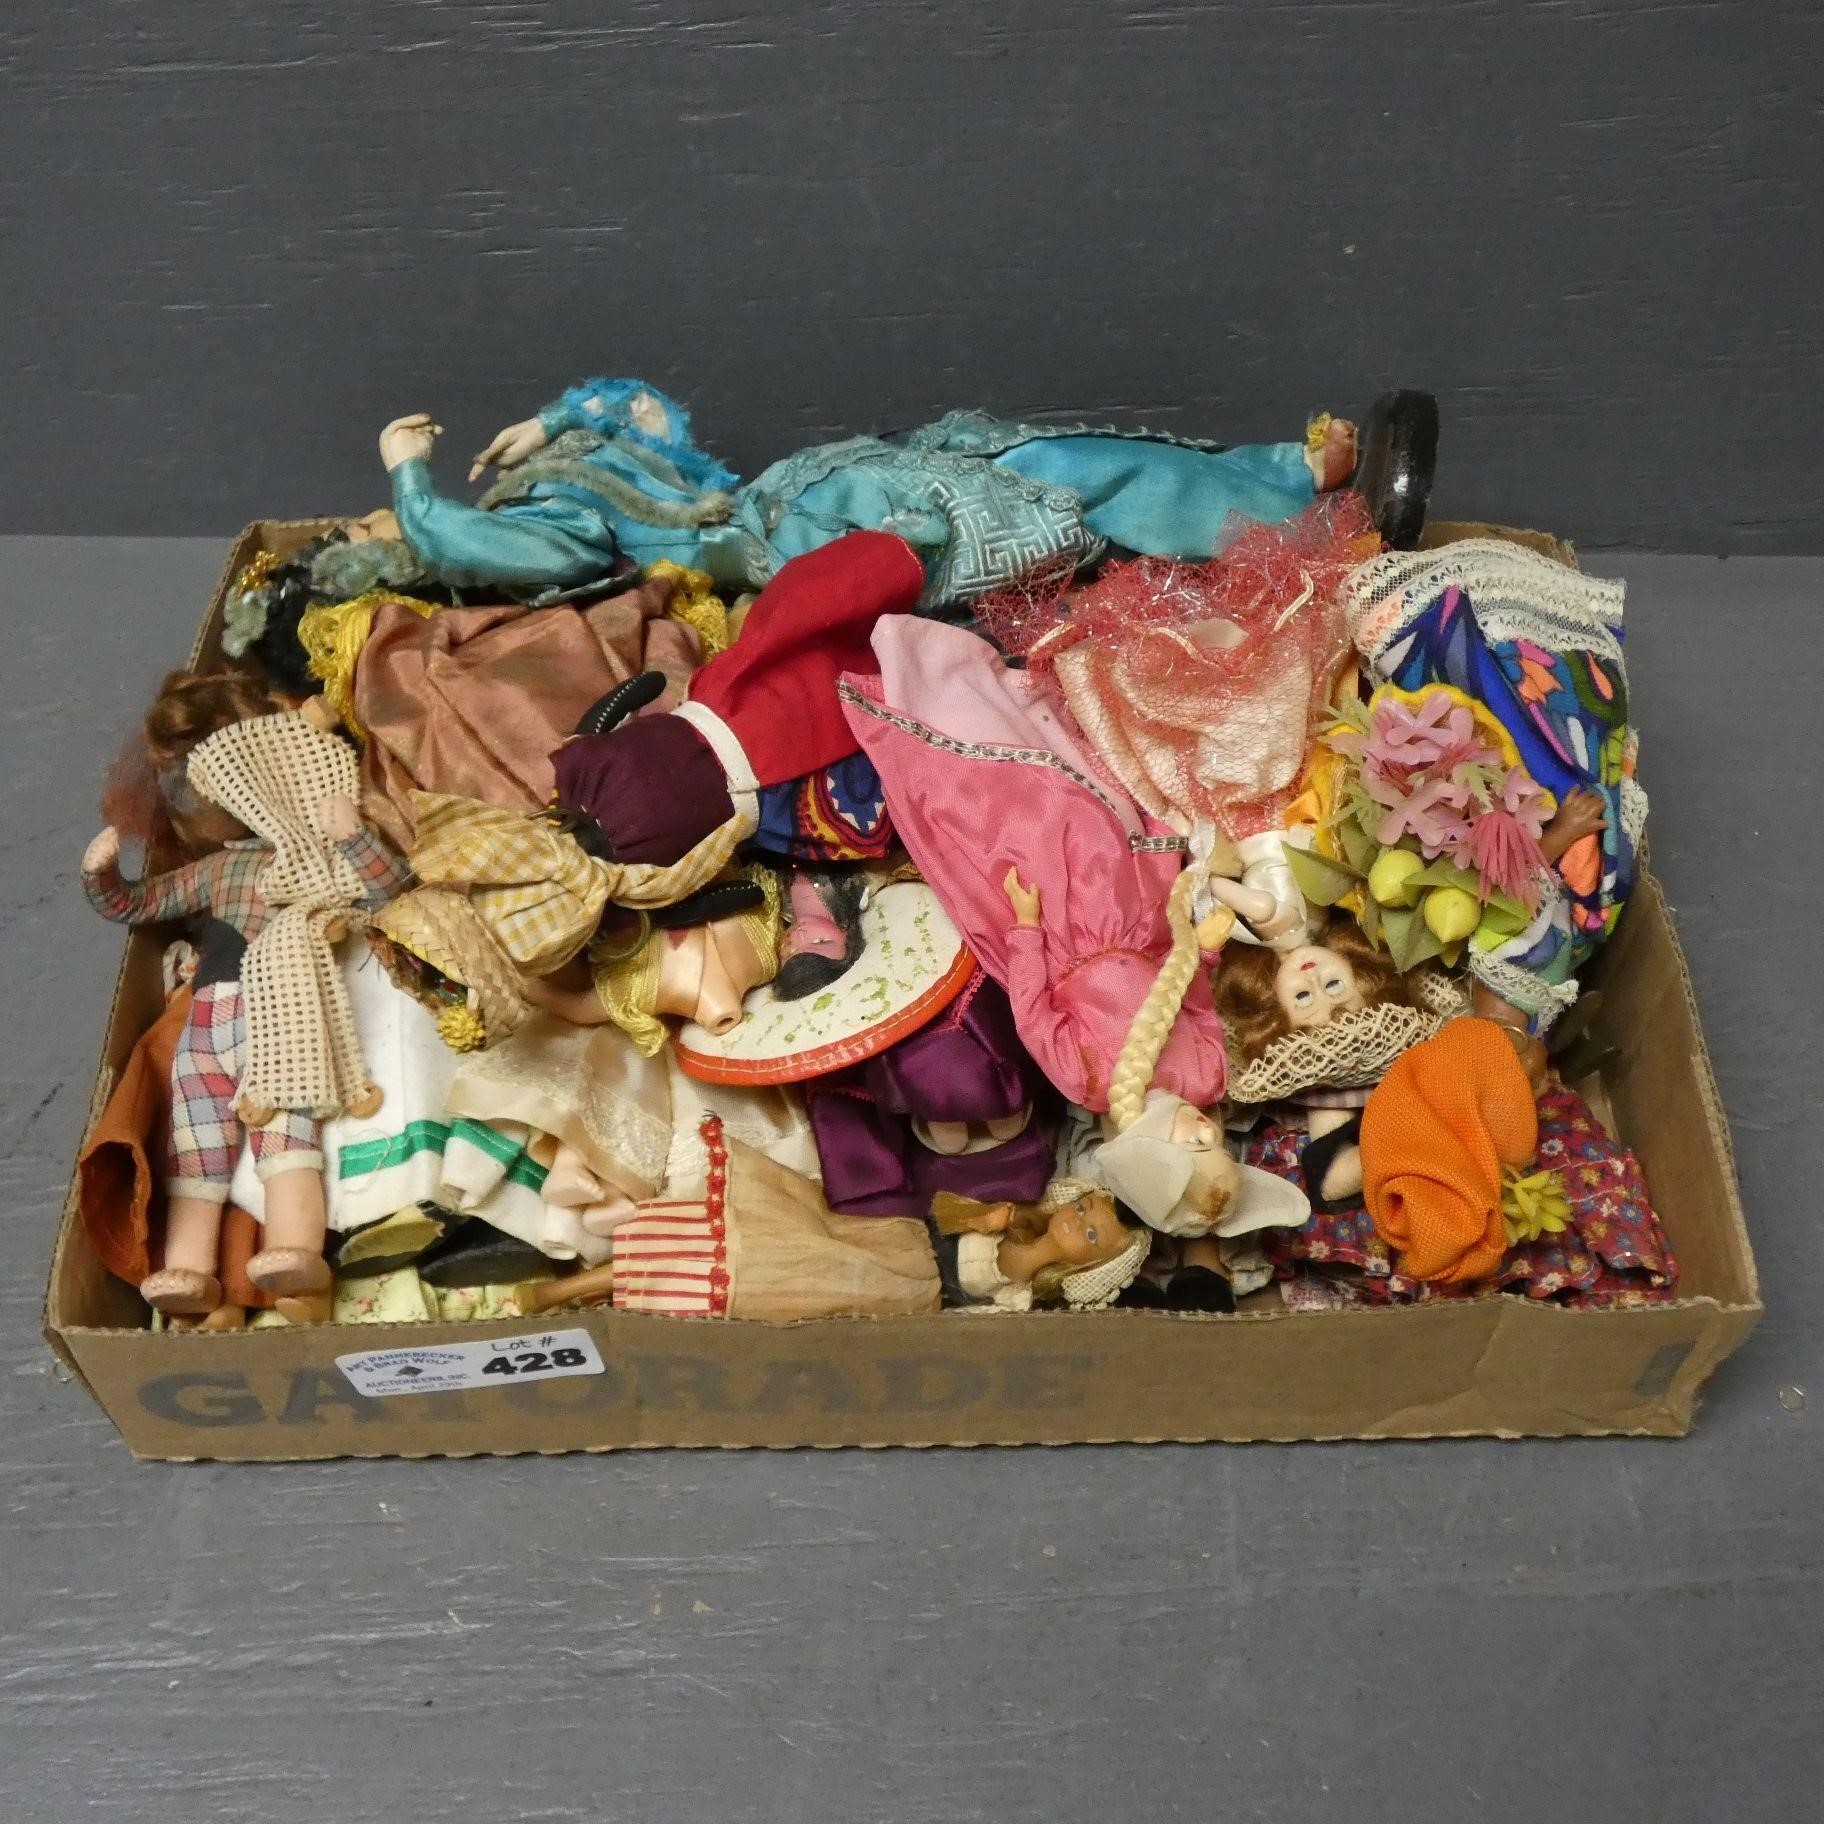 Assorted Dolls From Around the World